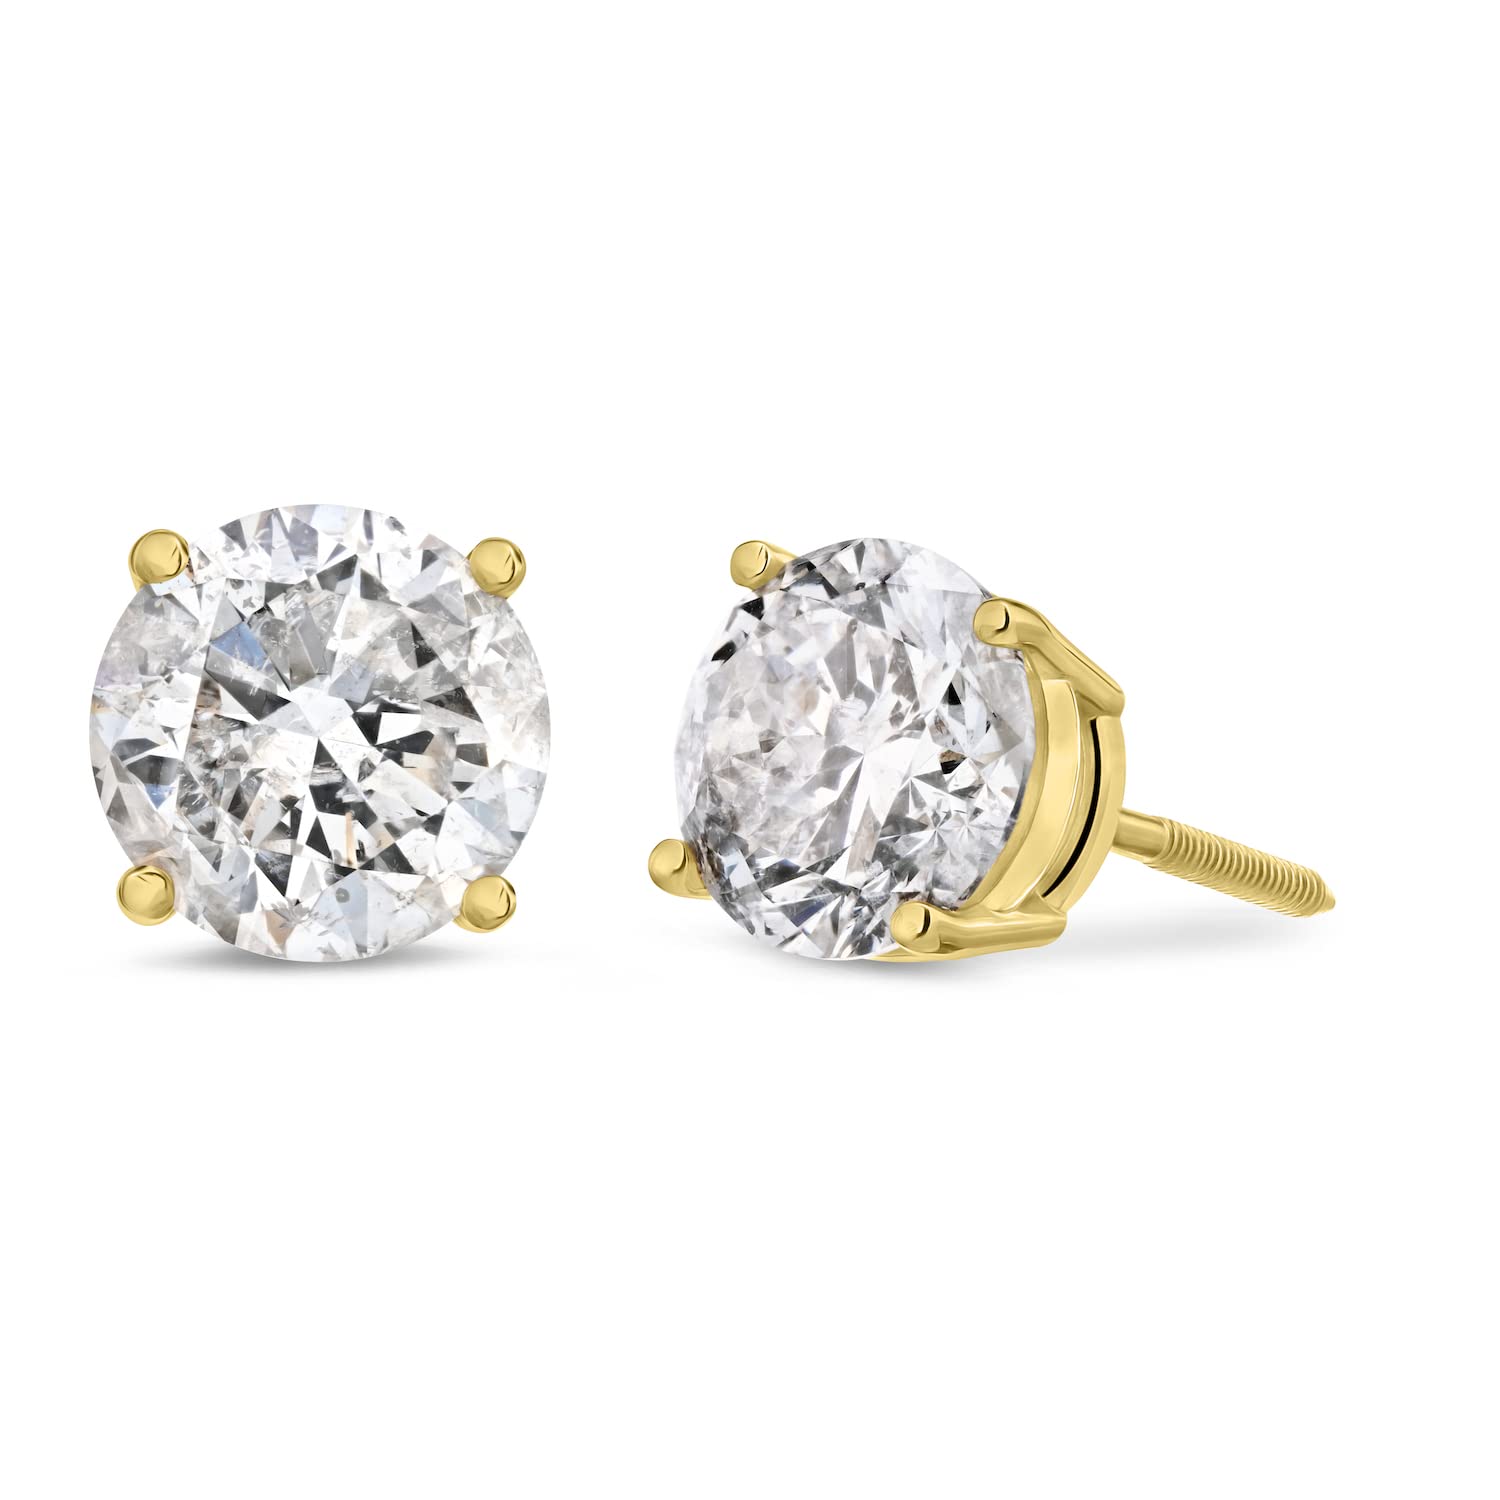 Amazon Collection Certified 14k White Gold Diamond with Screw Back and Post Stud Earrings (J-K Color, I1-I2 Clarity)